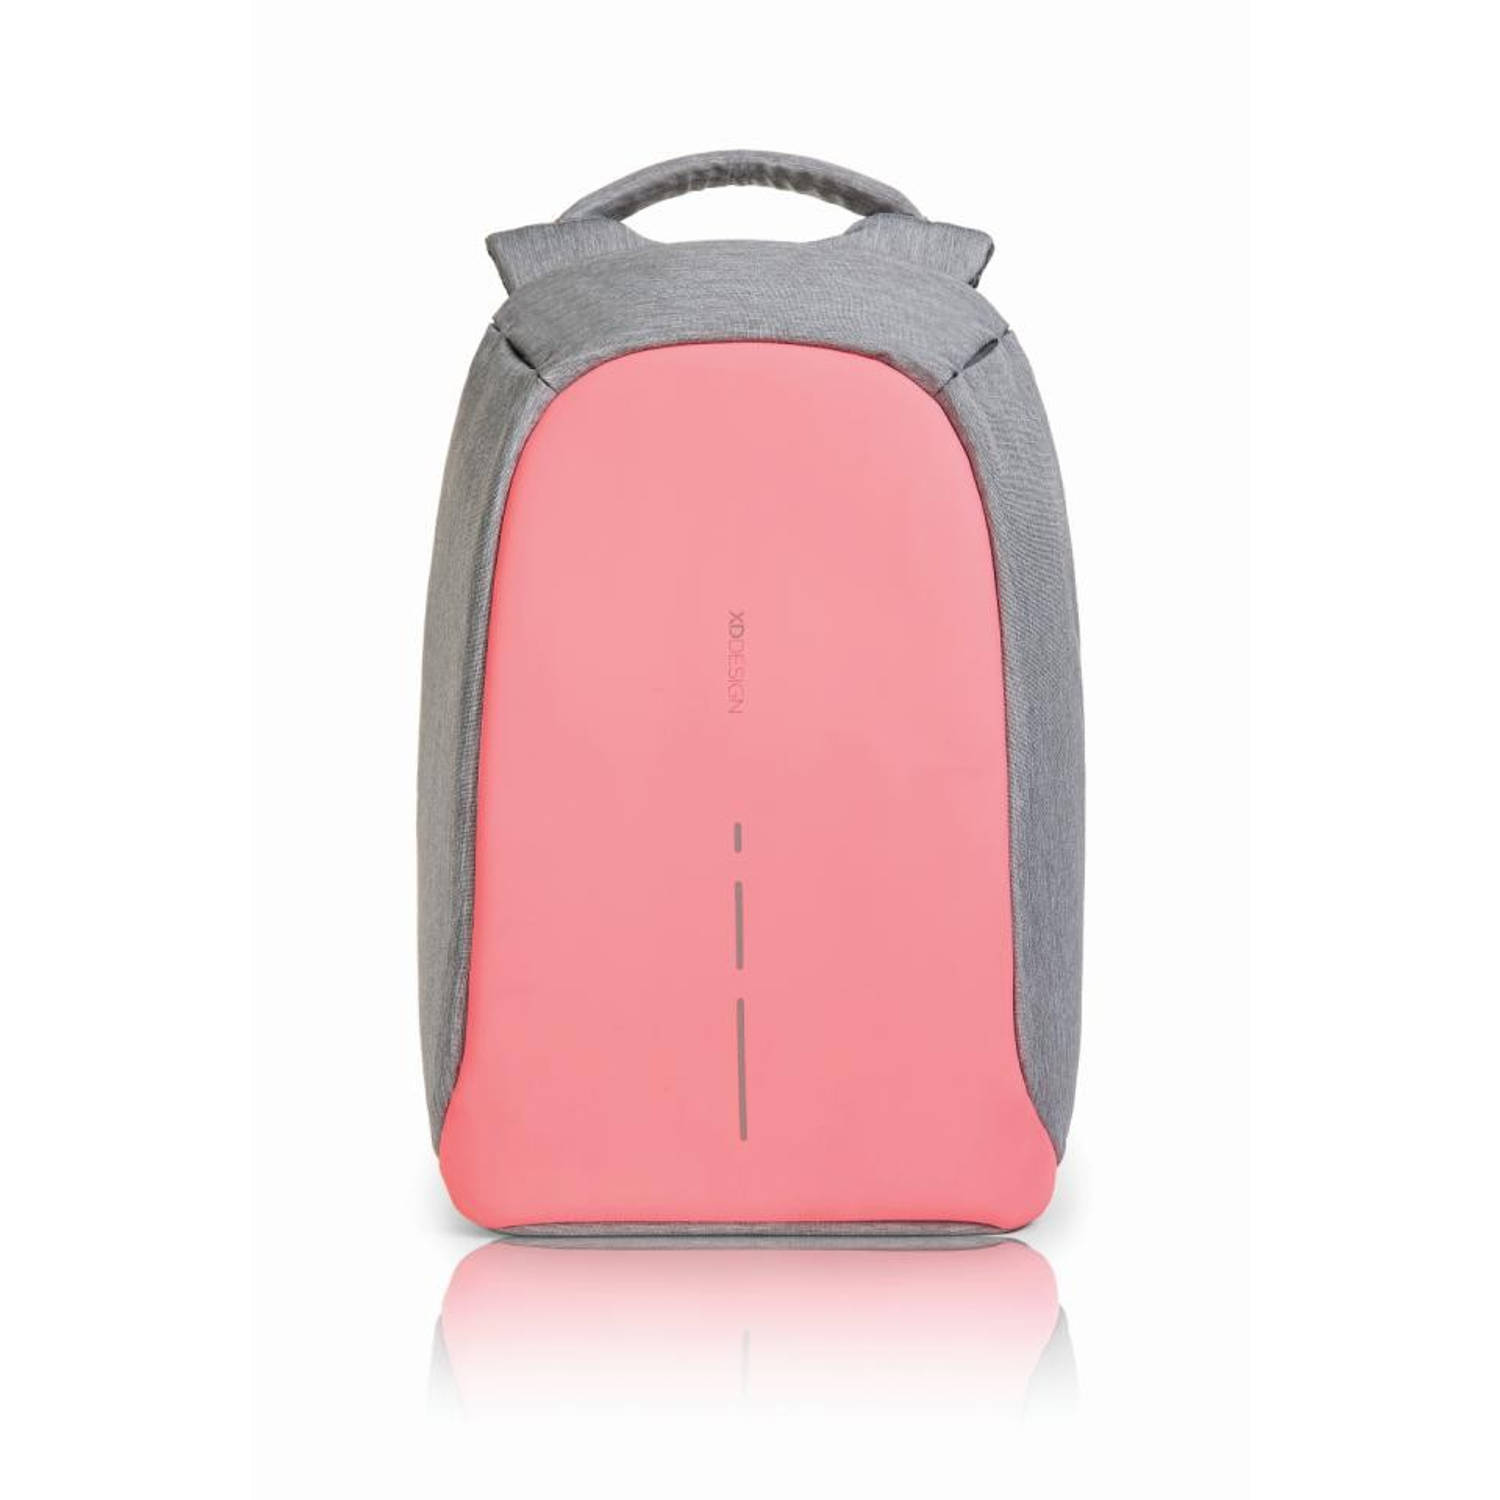 Bobby compact anti-diefstal backpack - roze